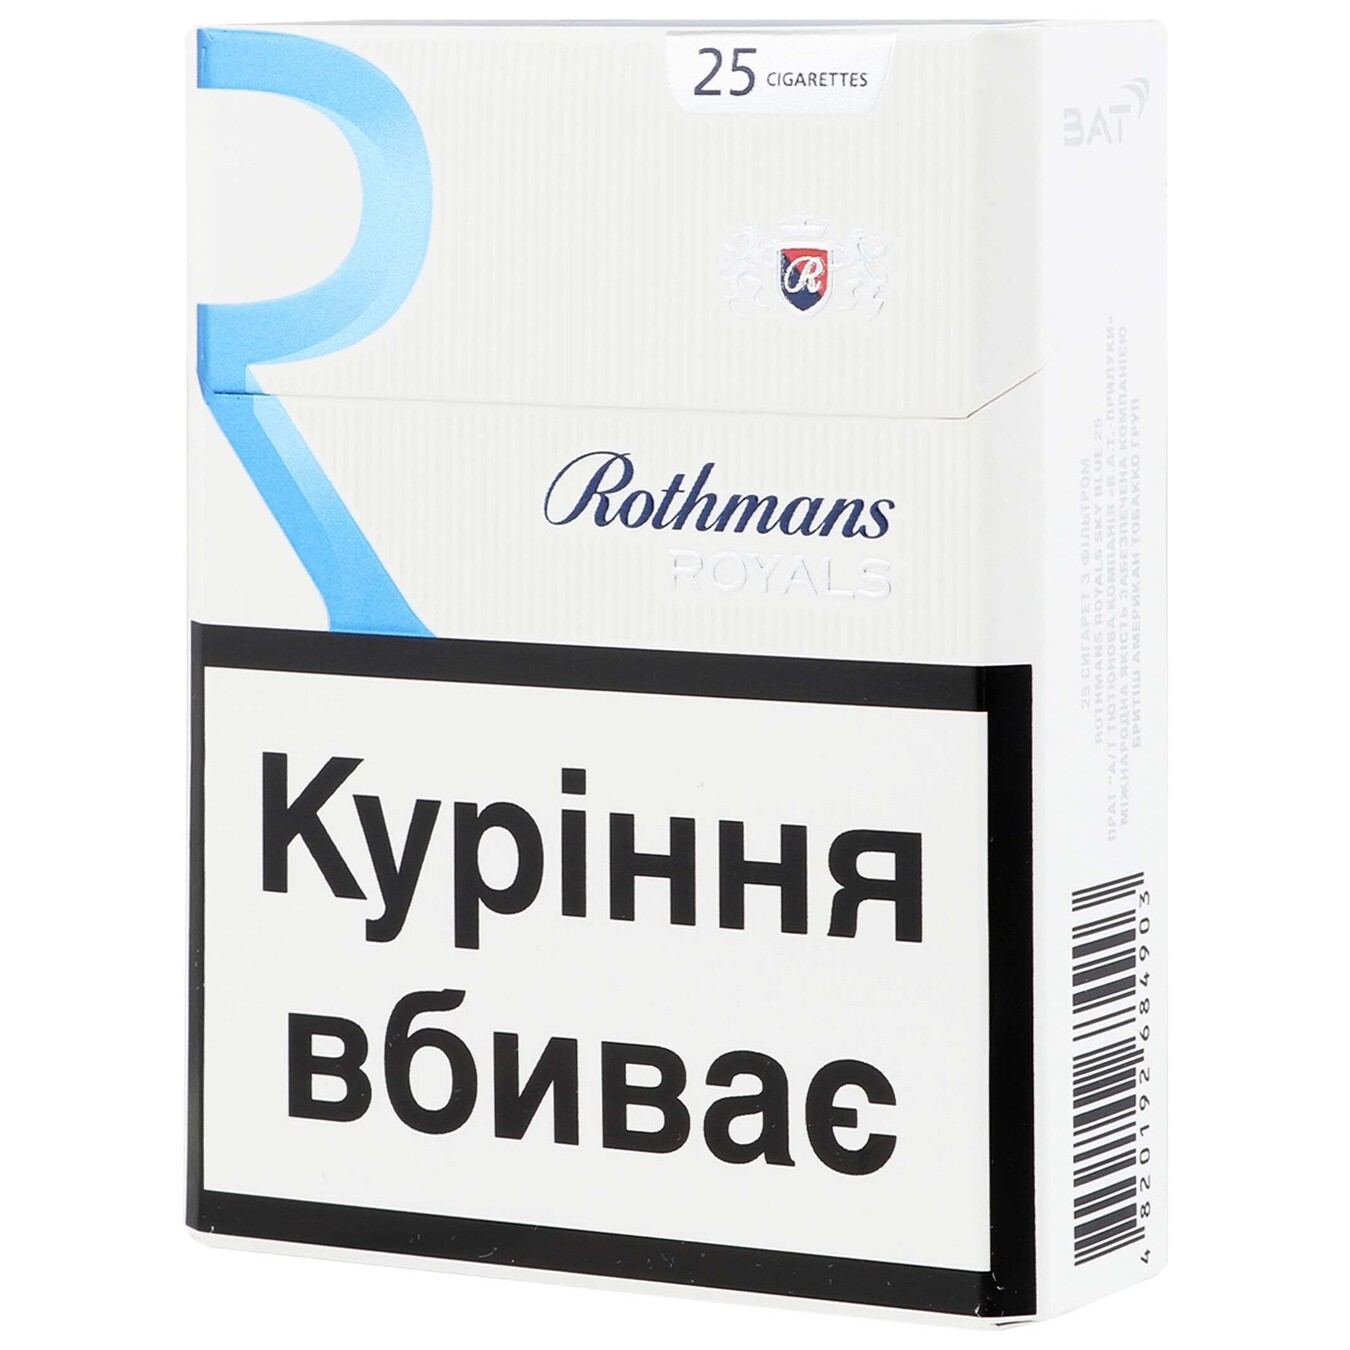 Rothmans Royals Sky Blue 25 cigarettes (the price is indicated without excise tax) 2